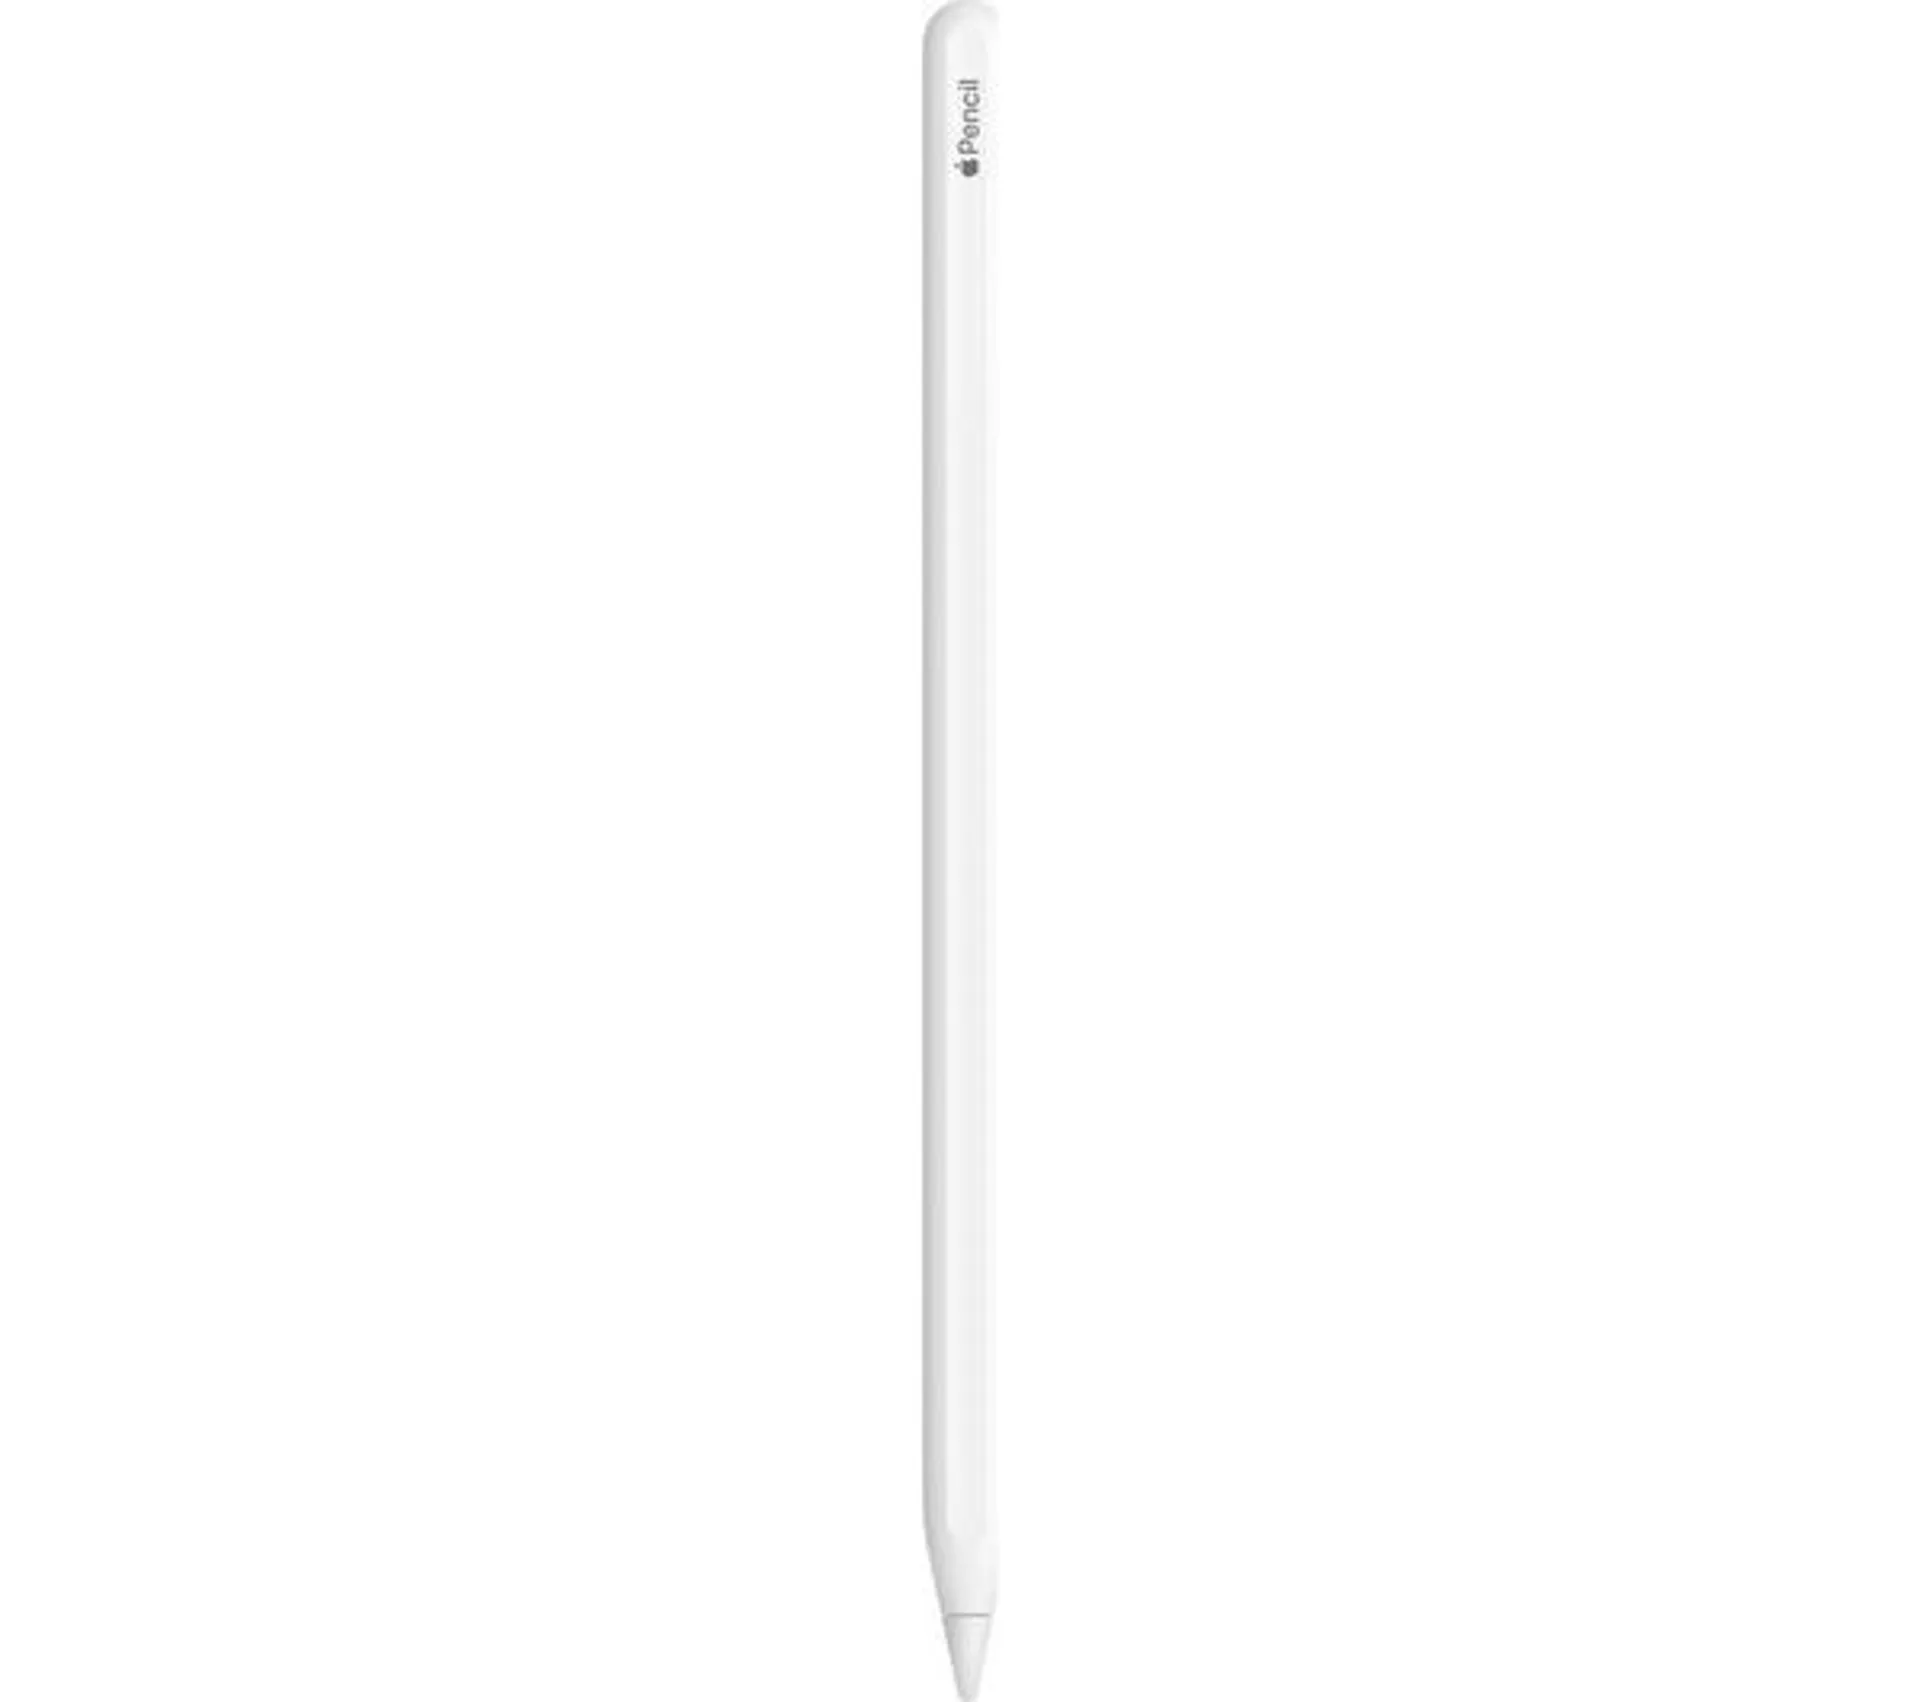 APPLE Pencil (2nd Generation) - White